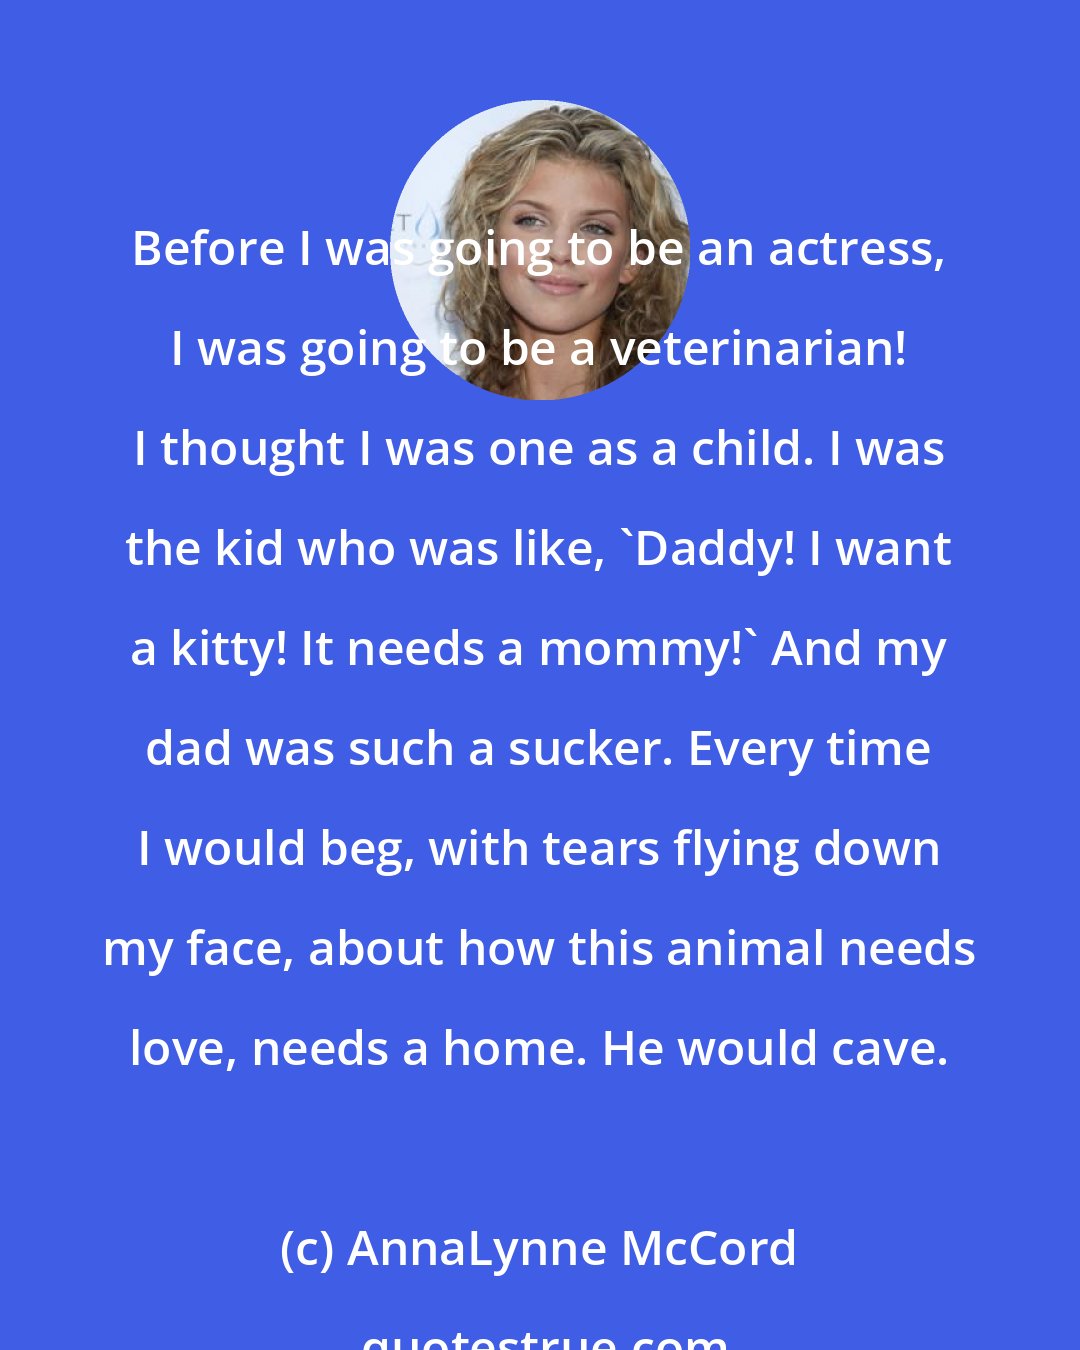 AnnaLynne McCord: Before I was going to be an actress, I was going to be a veterinarian! I thought I was one as a child. I was the kid who was like, 'Daddy! I want a kitty! It needs a mommy!' And my dad was such a sucker. Every time I would beg, with tears flying down my face, about how this animal needs love, needs a home. He would cave.